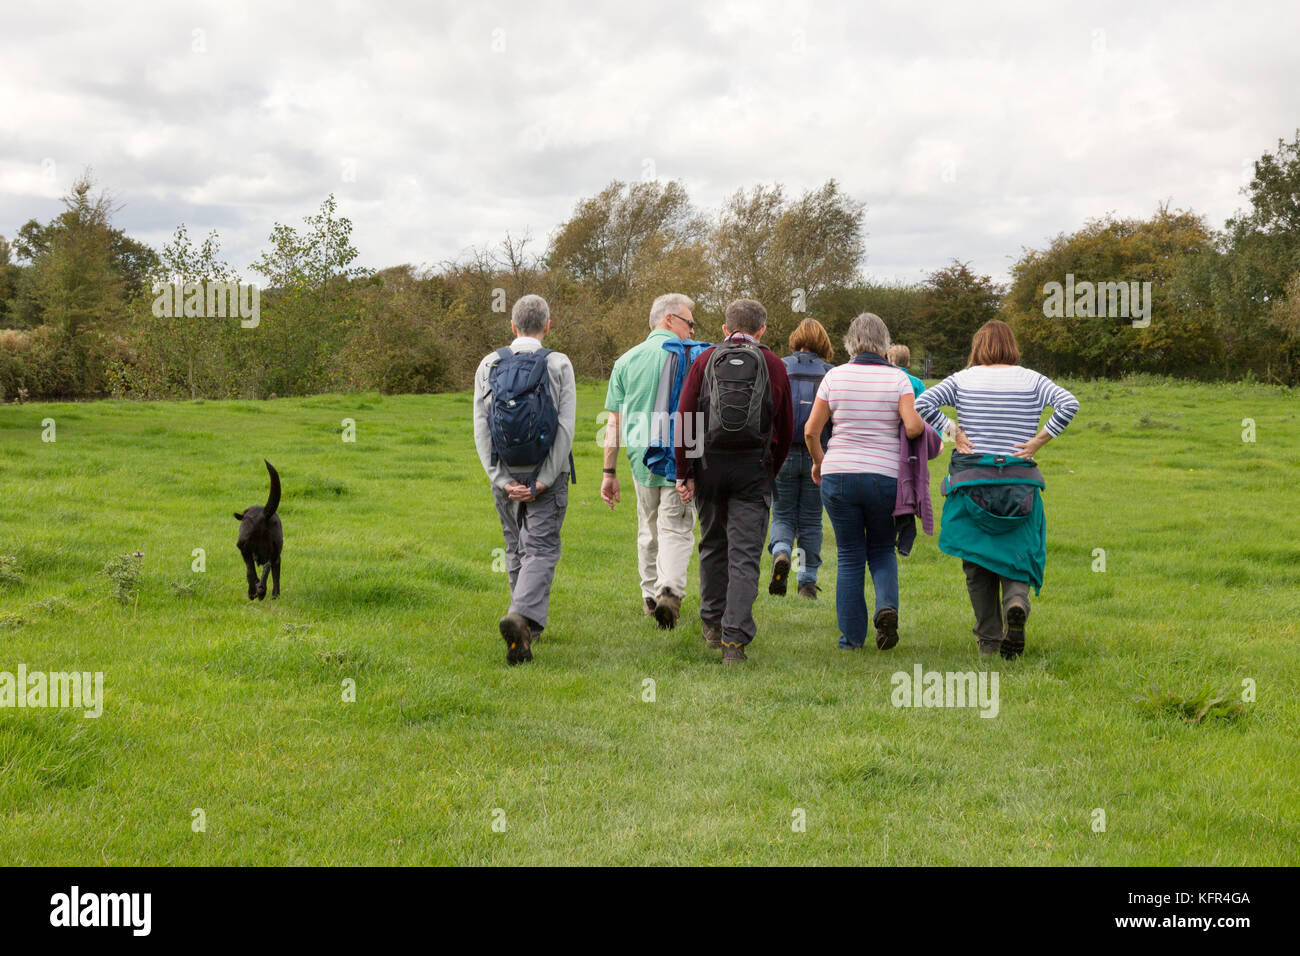 Group of people walking the dog in UK countryside from the rear view; Northmoor, Oxfordshire England UK Stock Photo